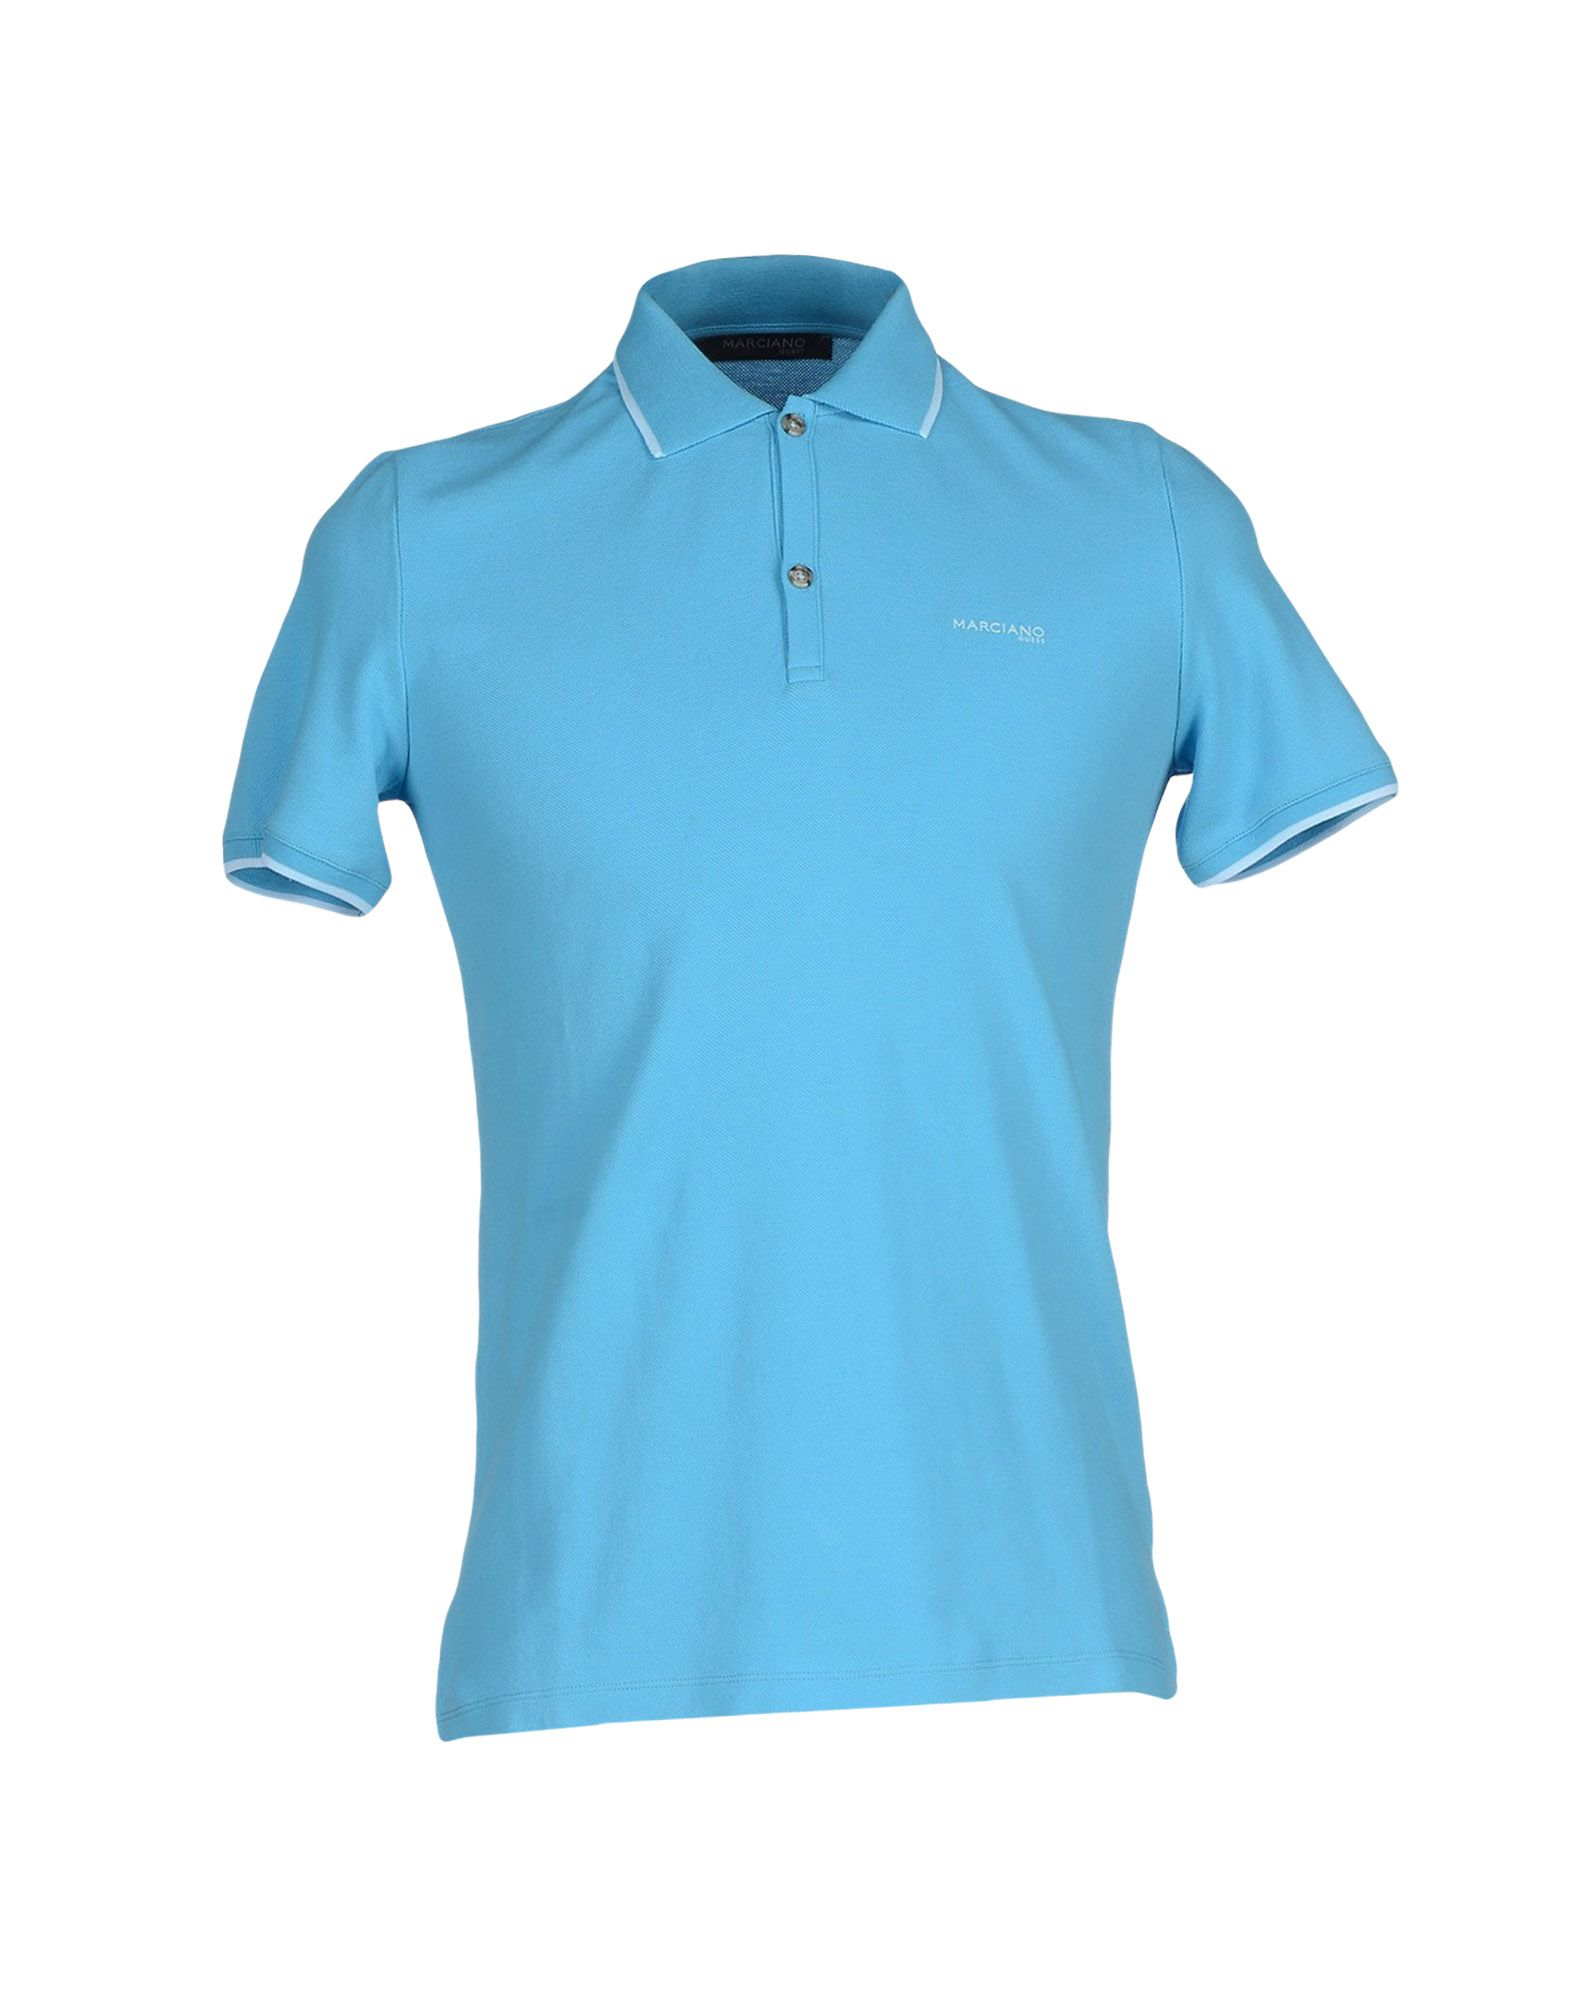 Guess Polo Shirt in Blue for Men - Lyst